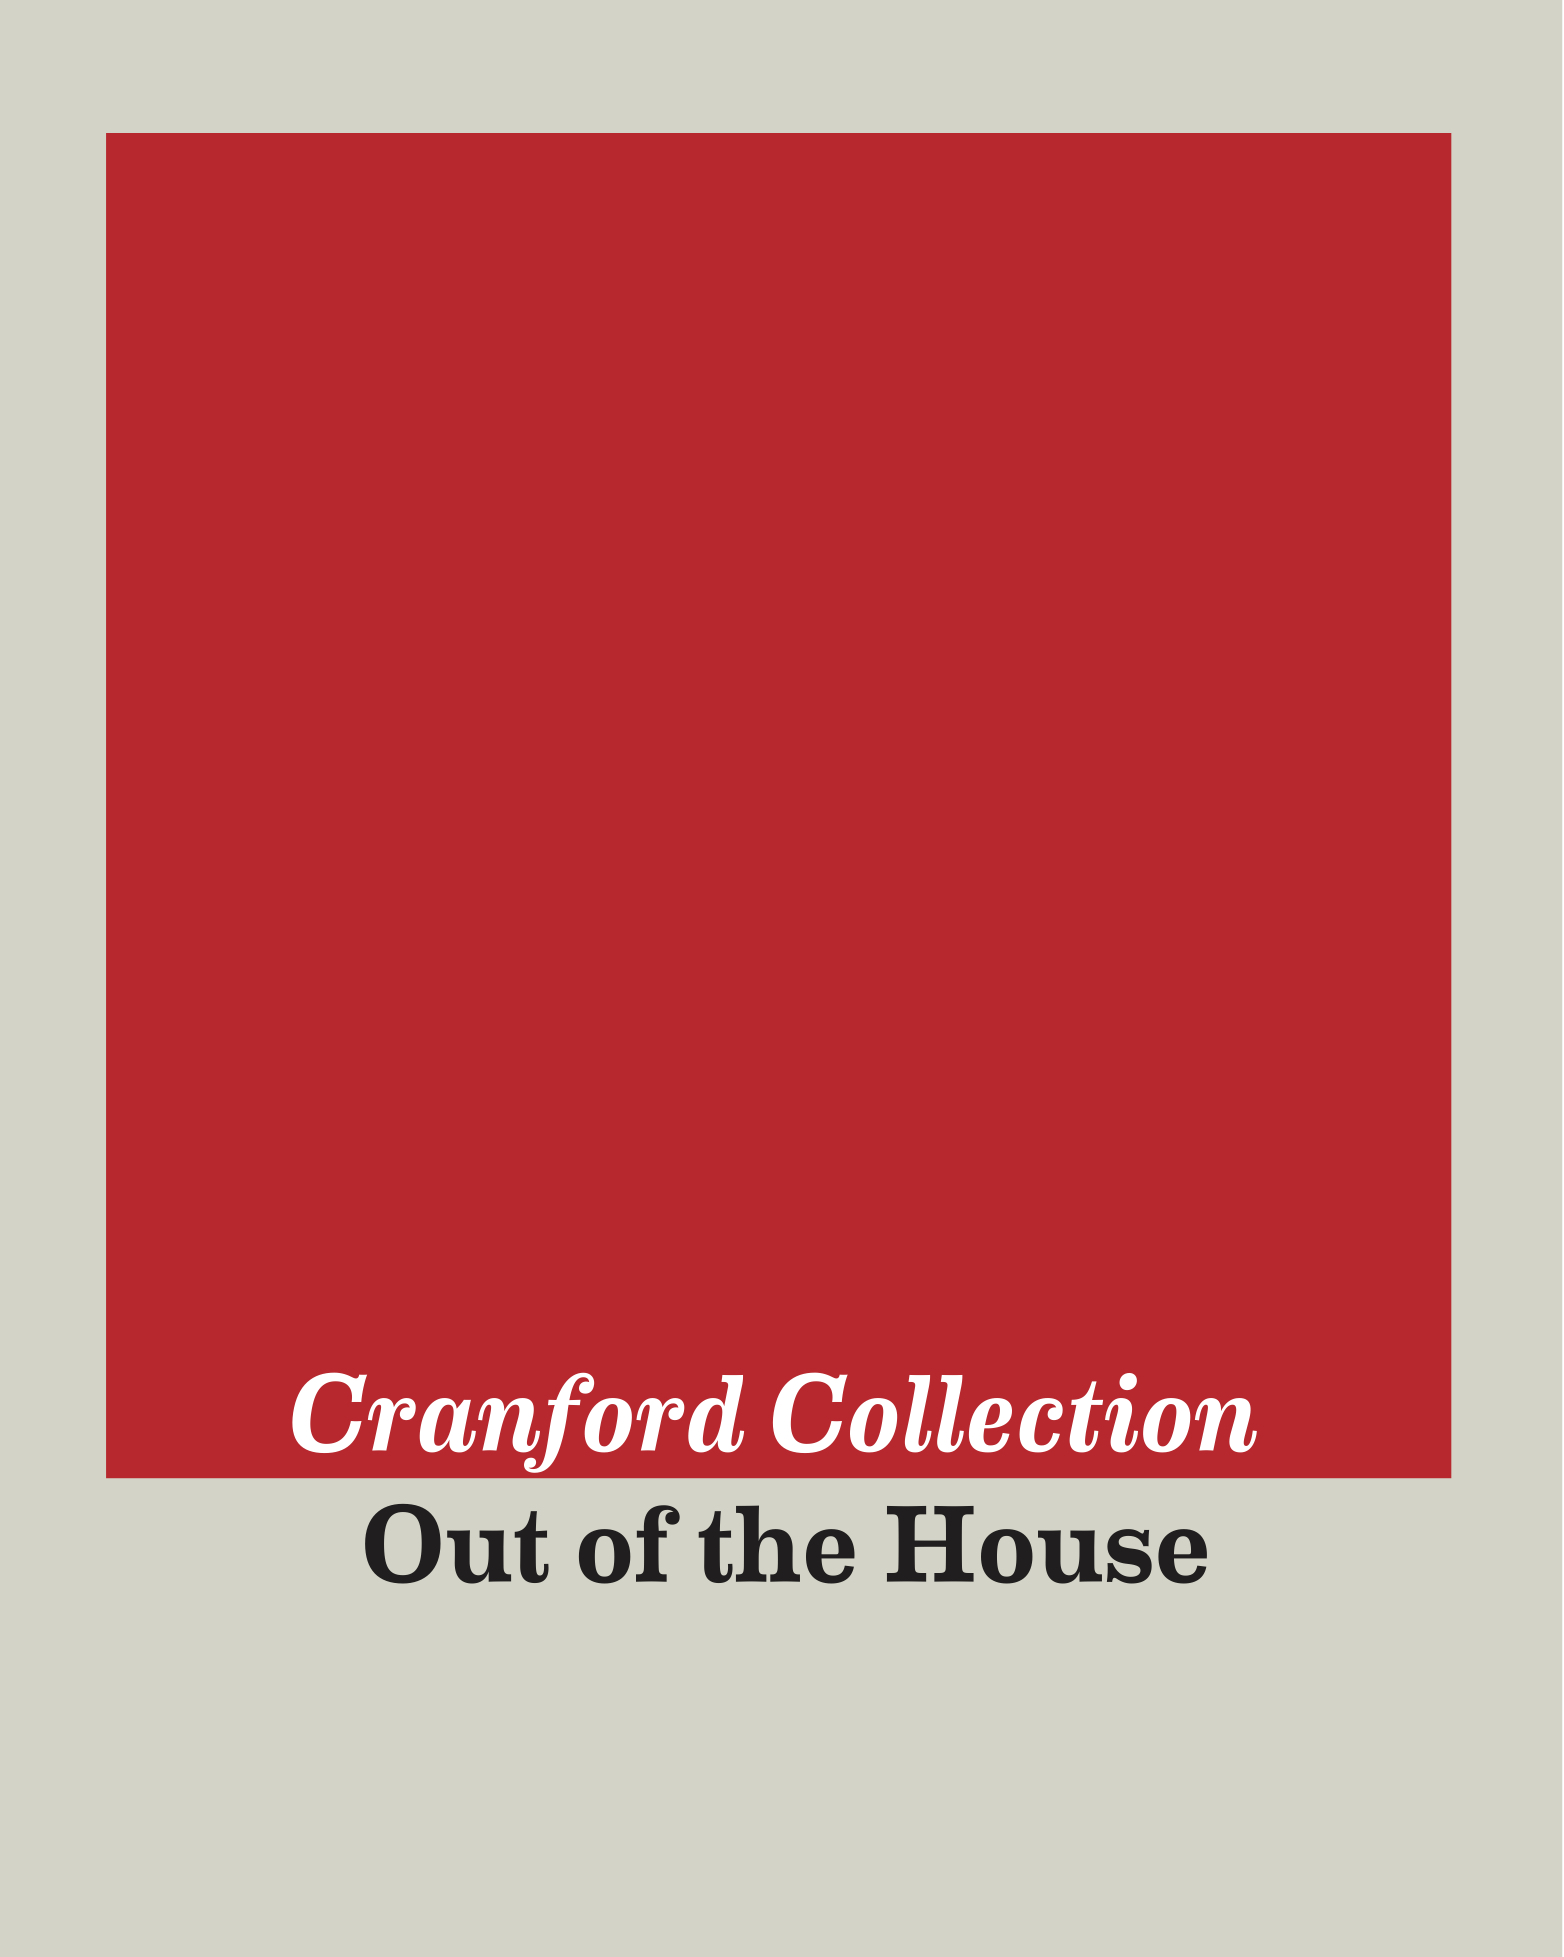 Anne Pontégnie, “Out of the House,” in: "Cranford Collection. Out of the House". Madrid/London: Fundacion Banco Santander/Cranford Collection, 2013, p.12-13.